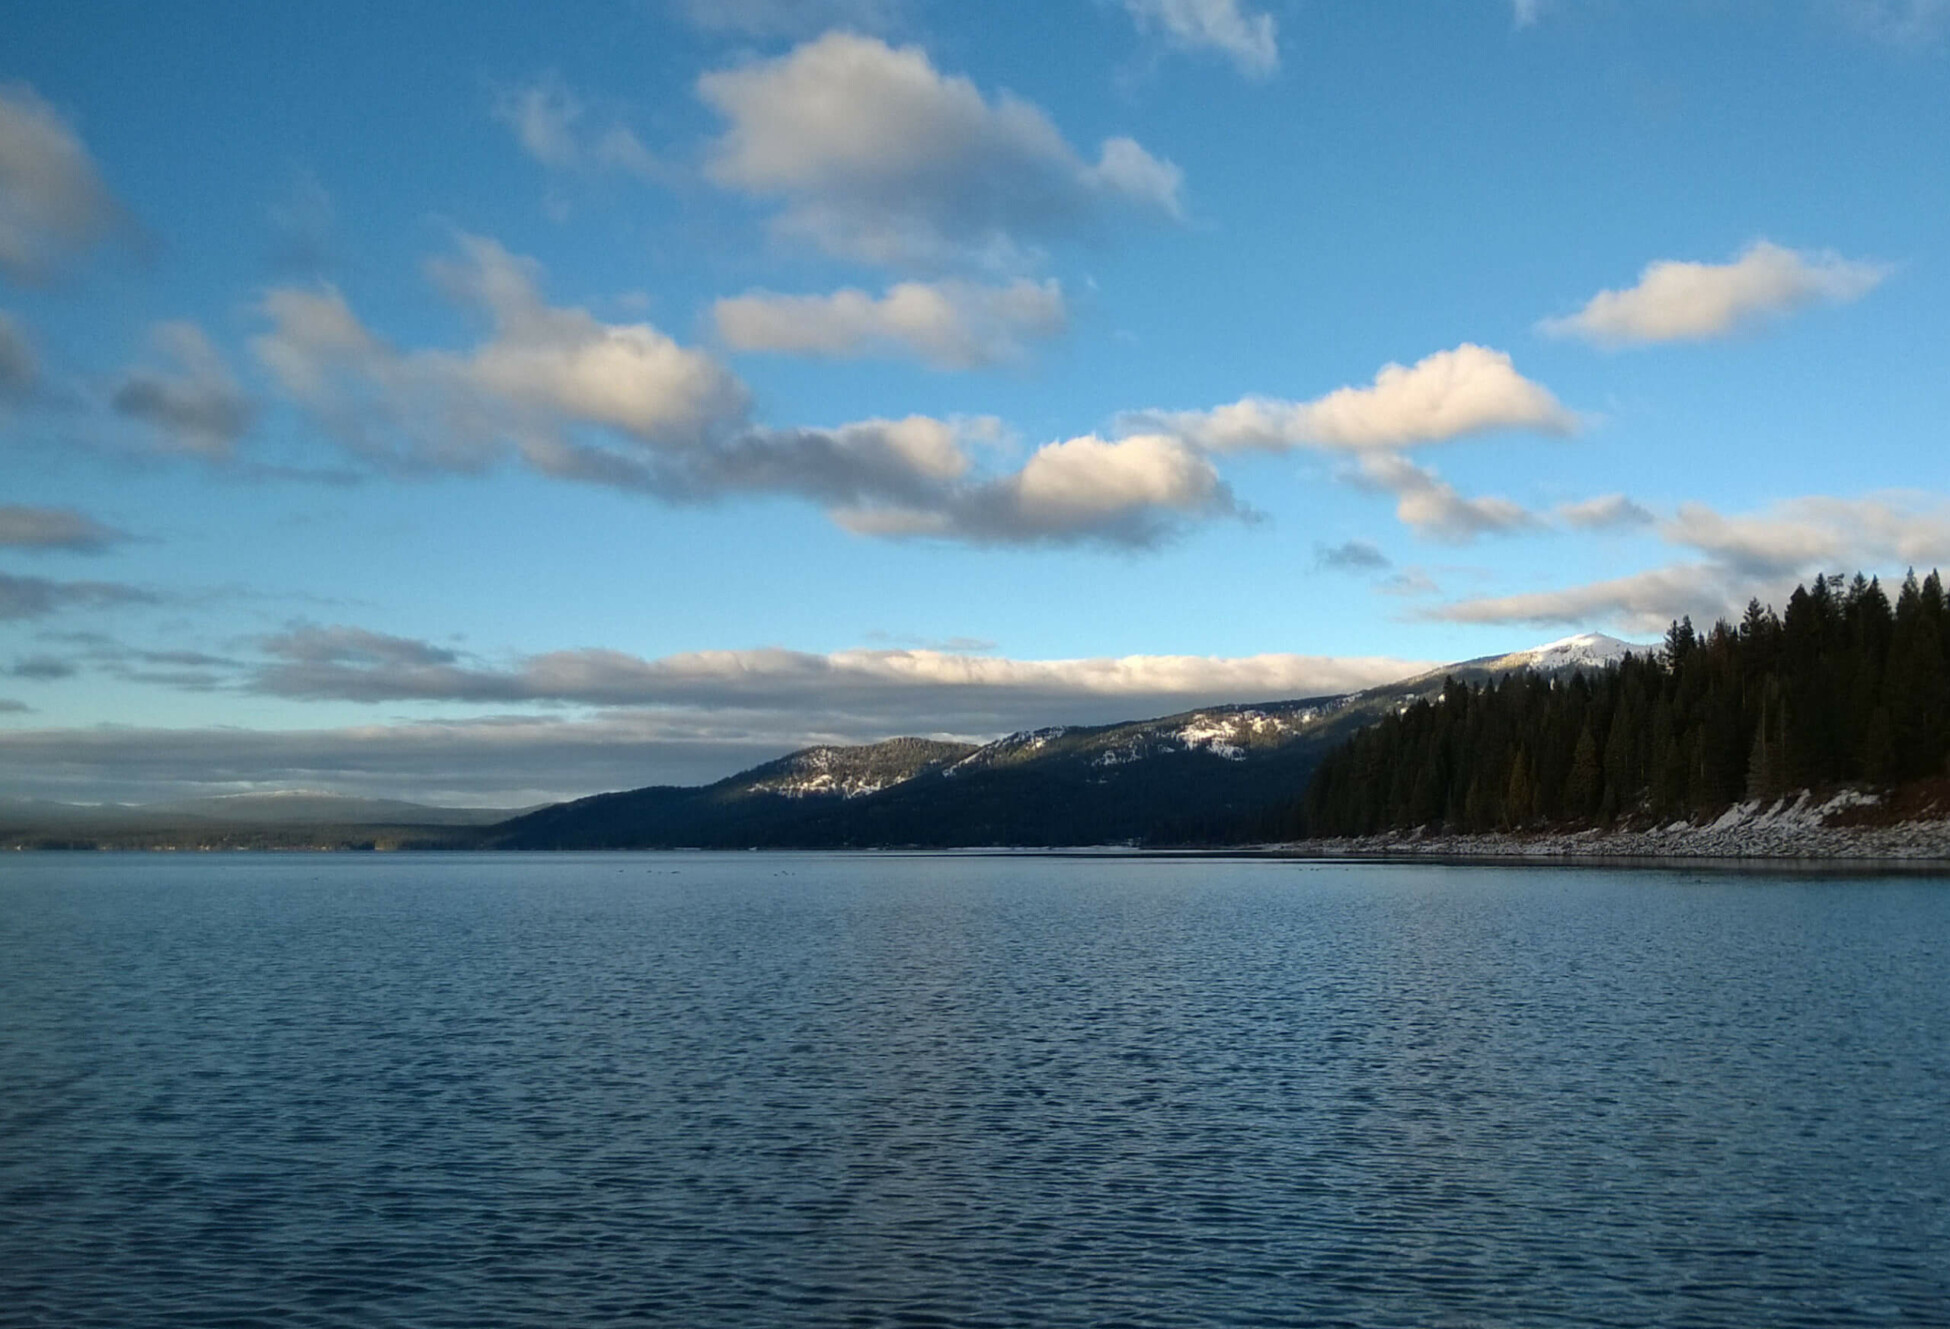 Lake Almanor with clouds